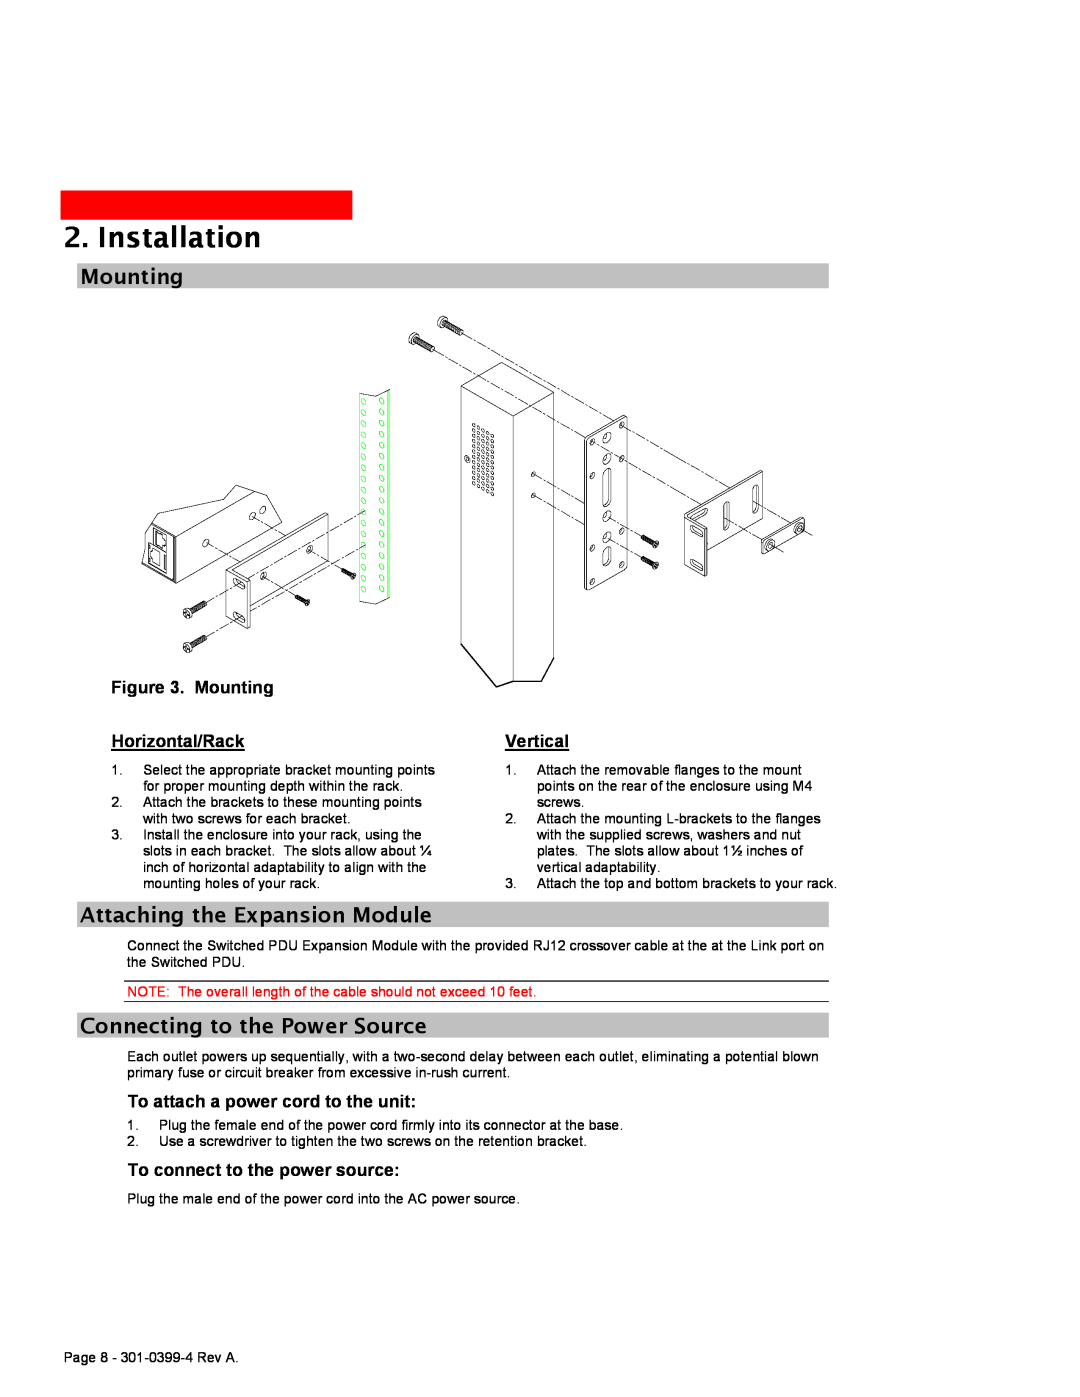 MGE UPS Systems Switched PDU user manual Mounting, Attaching the Expansion Module, Connecting to the Power Source, Vertical 